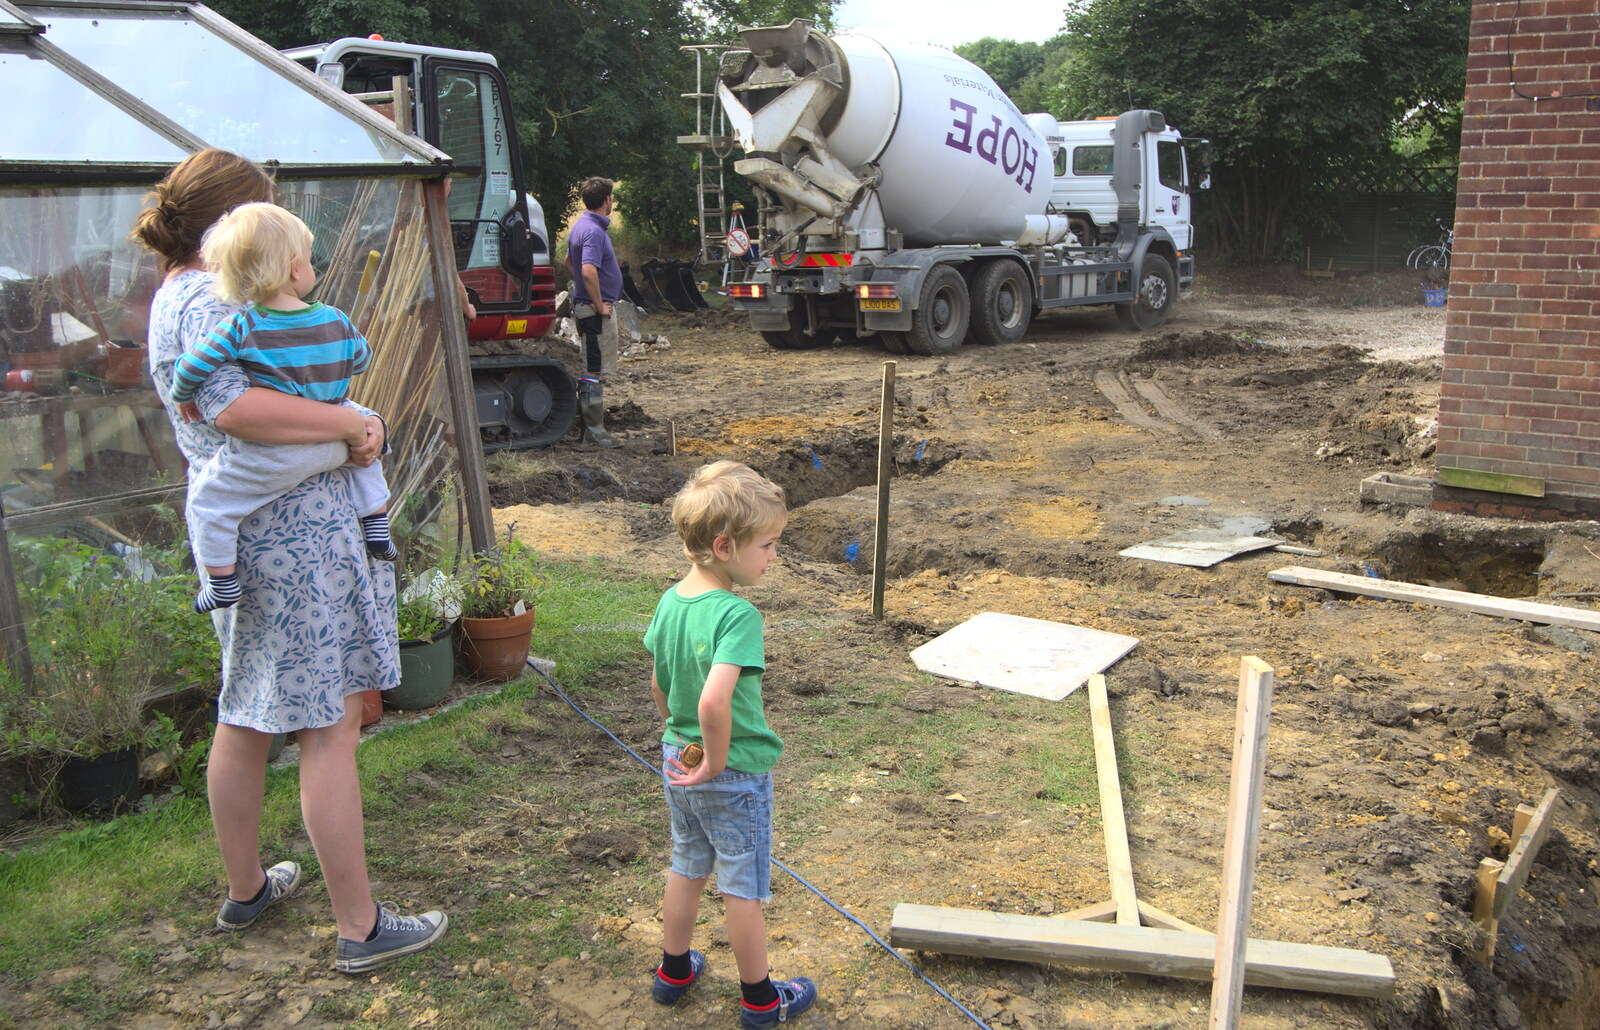 Isobel, Harry and Fred watch from Grand Designs: Building Commences, Brome, Suffolk - 8th August 2013